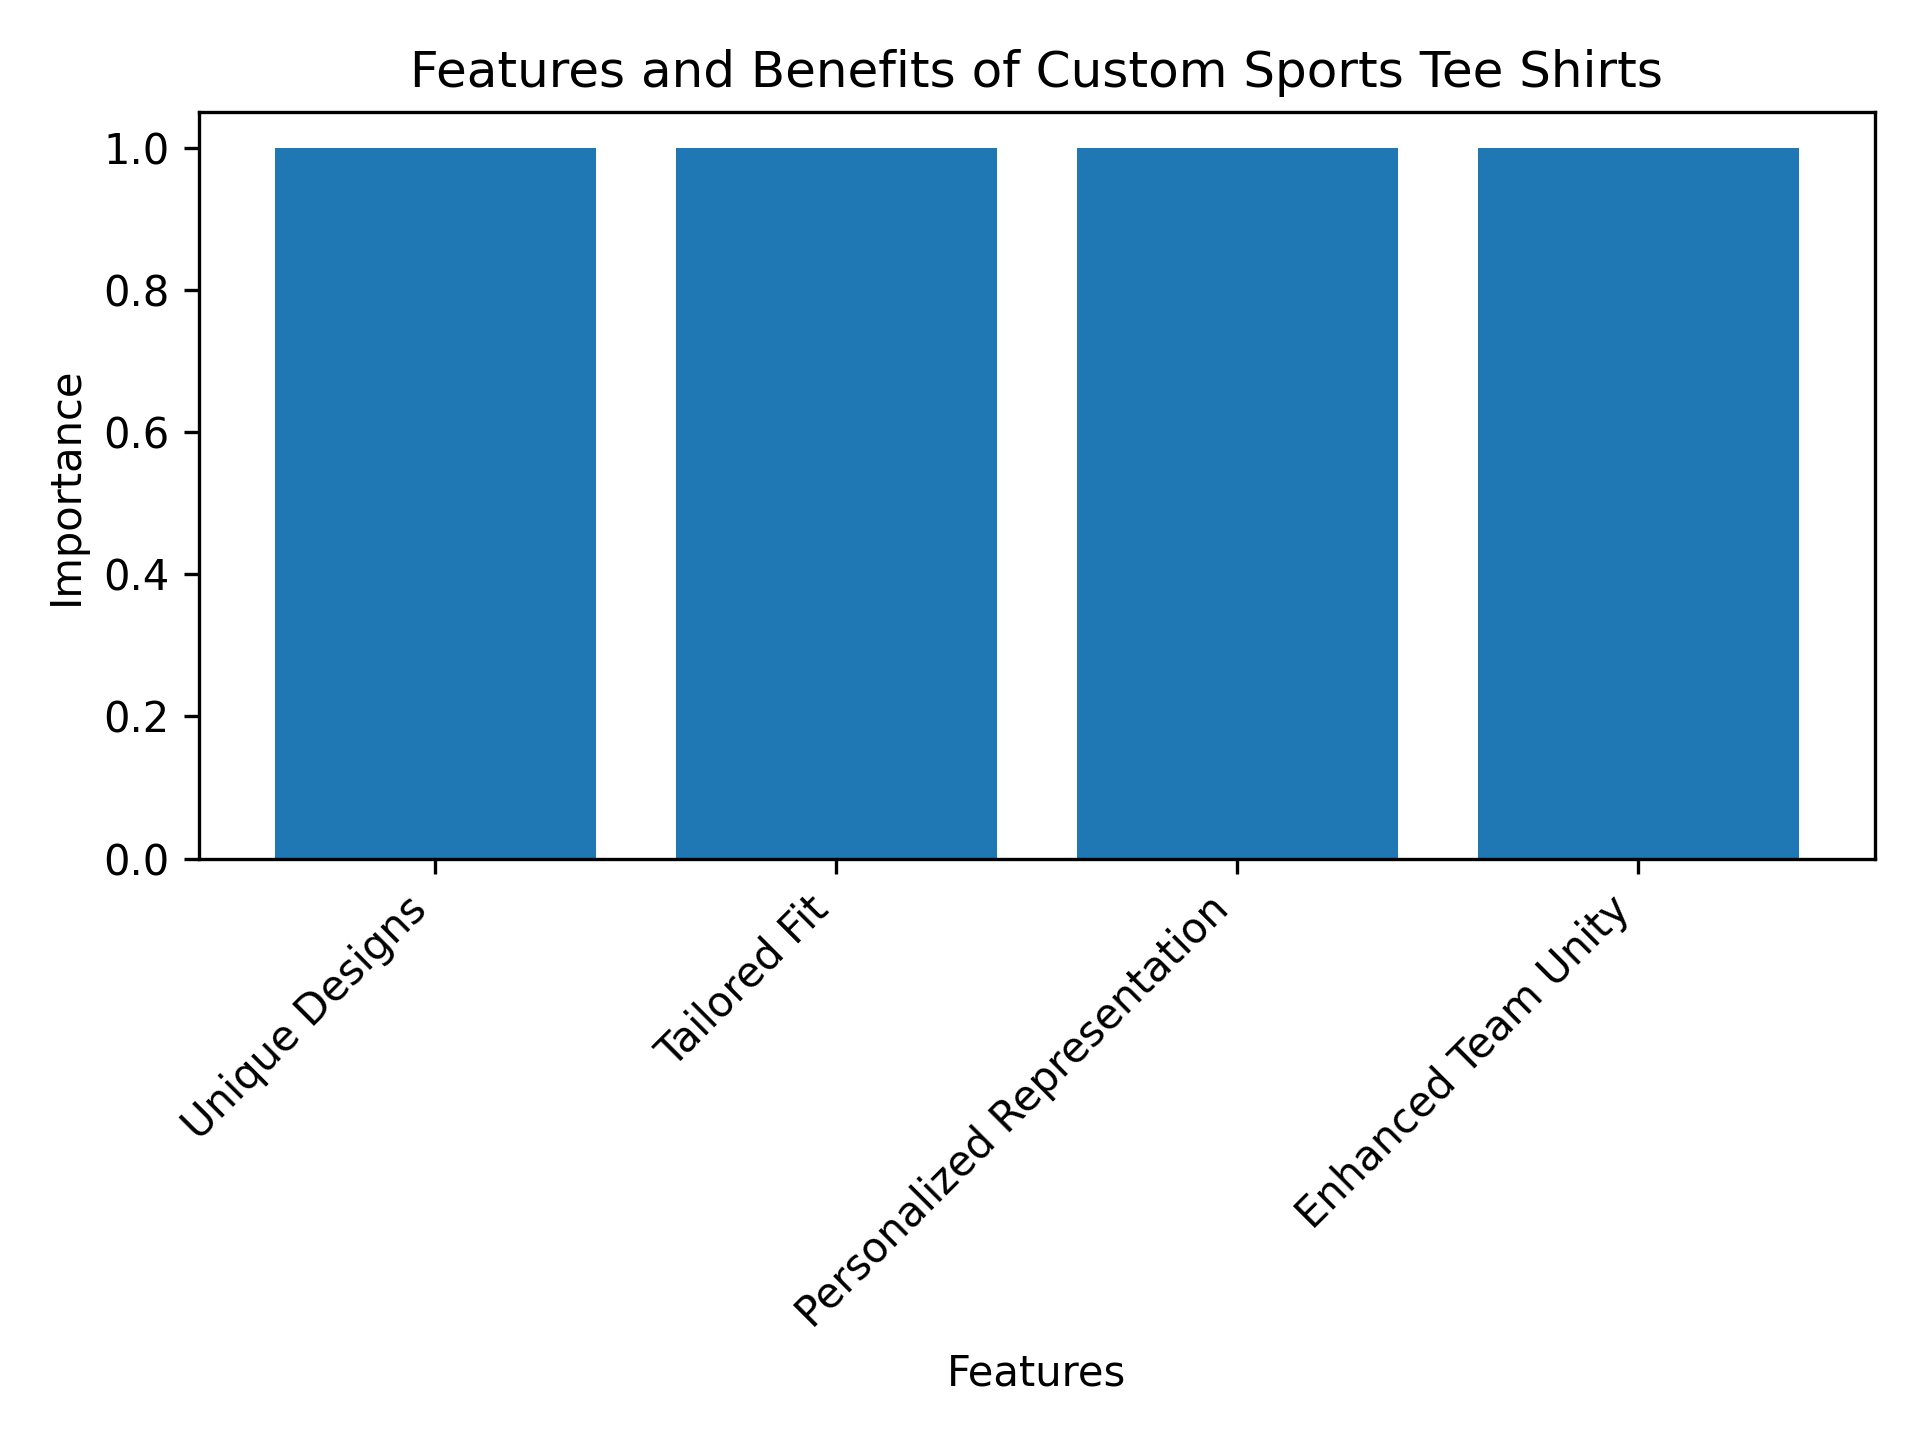 Features and Benefits of Custom Sports Tee Shirts